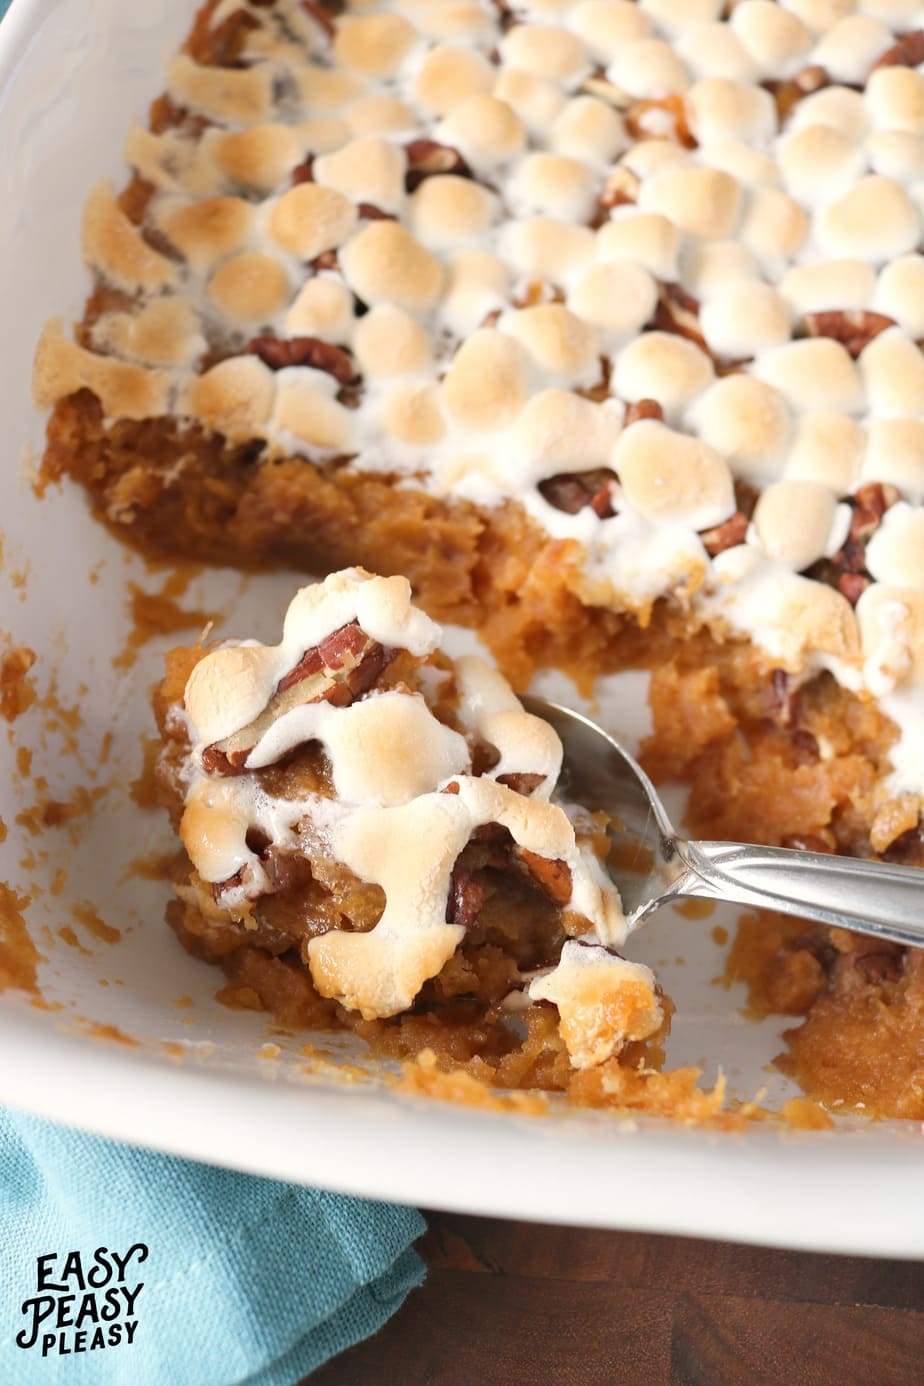 Simple but exquisite, this sweet potato casserole will be the talk of of the meal at your next holiday gathering.